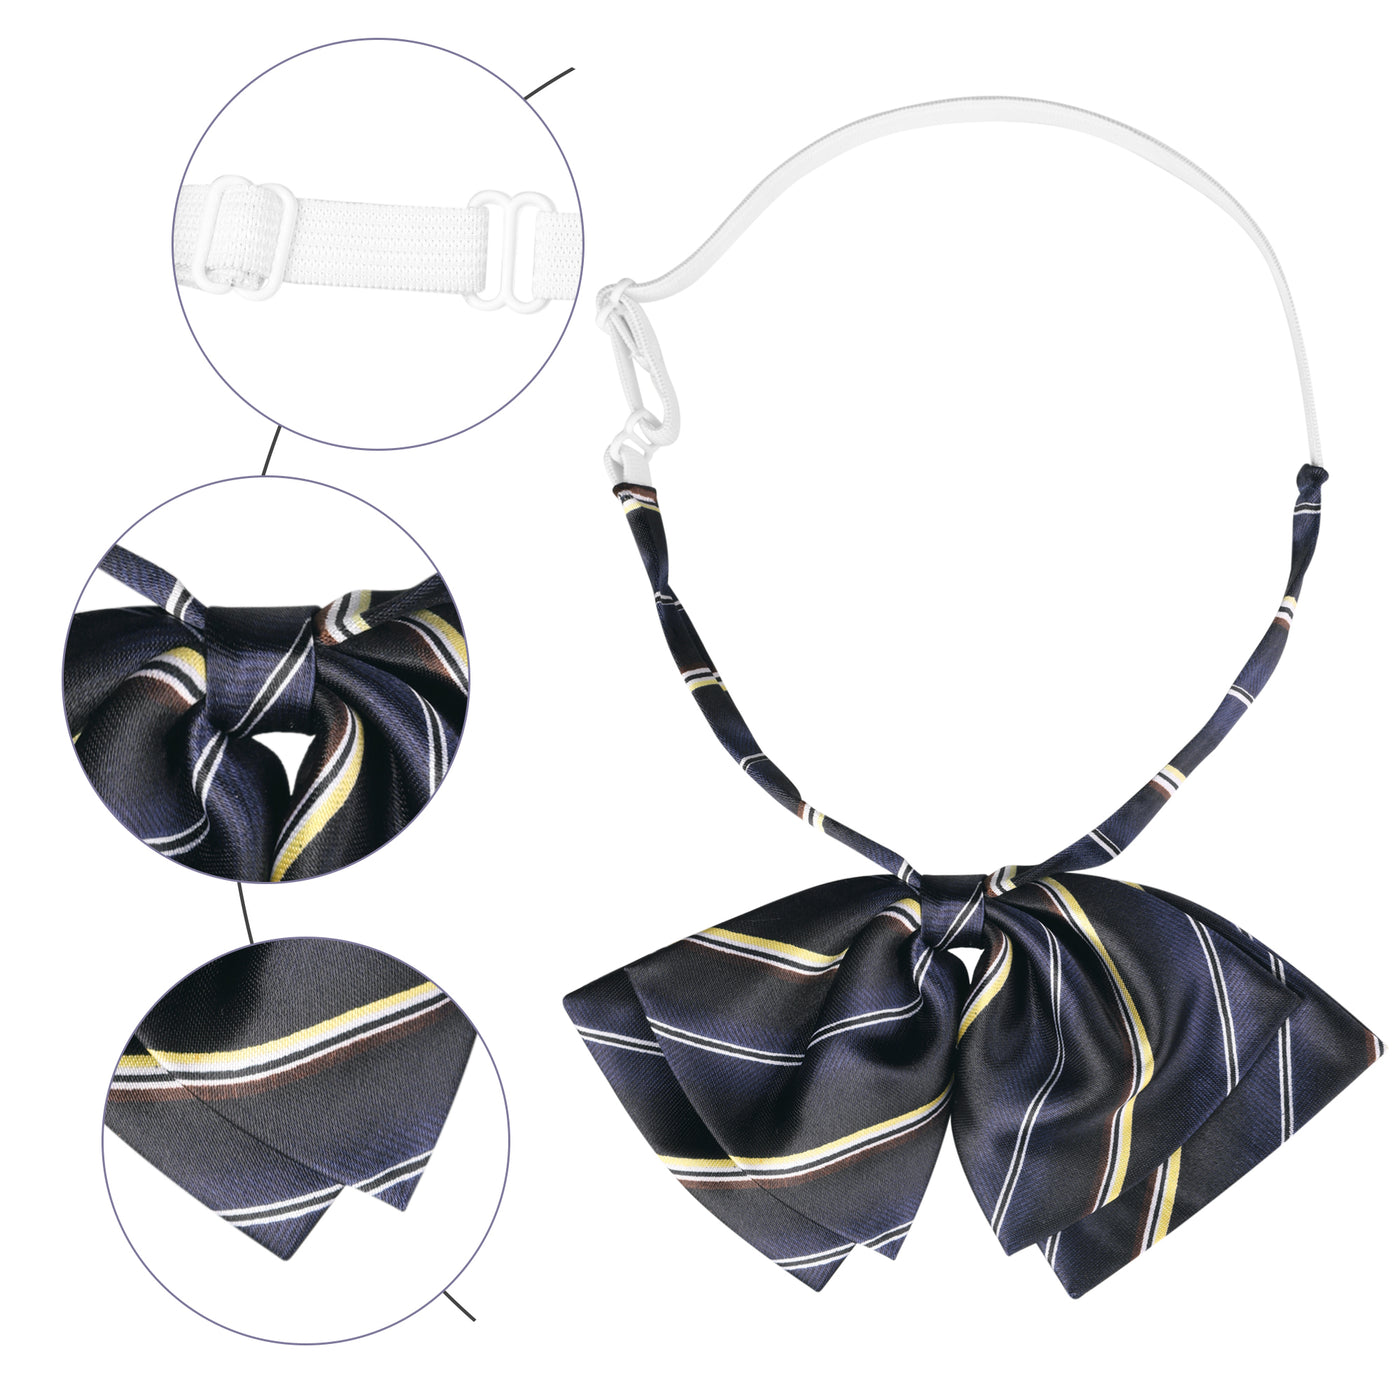 Bublédon Cute Uniform Tie, Double Layers Pretied Bowknot, Striped Bow Ties for Women School Casual